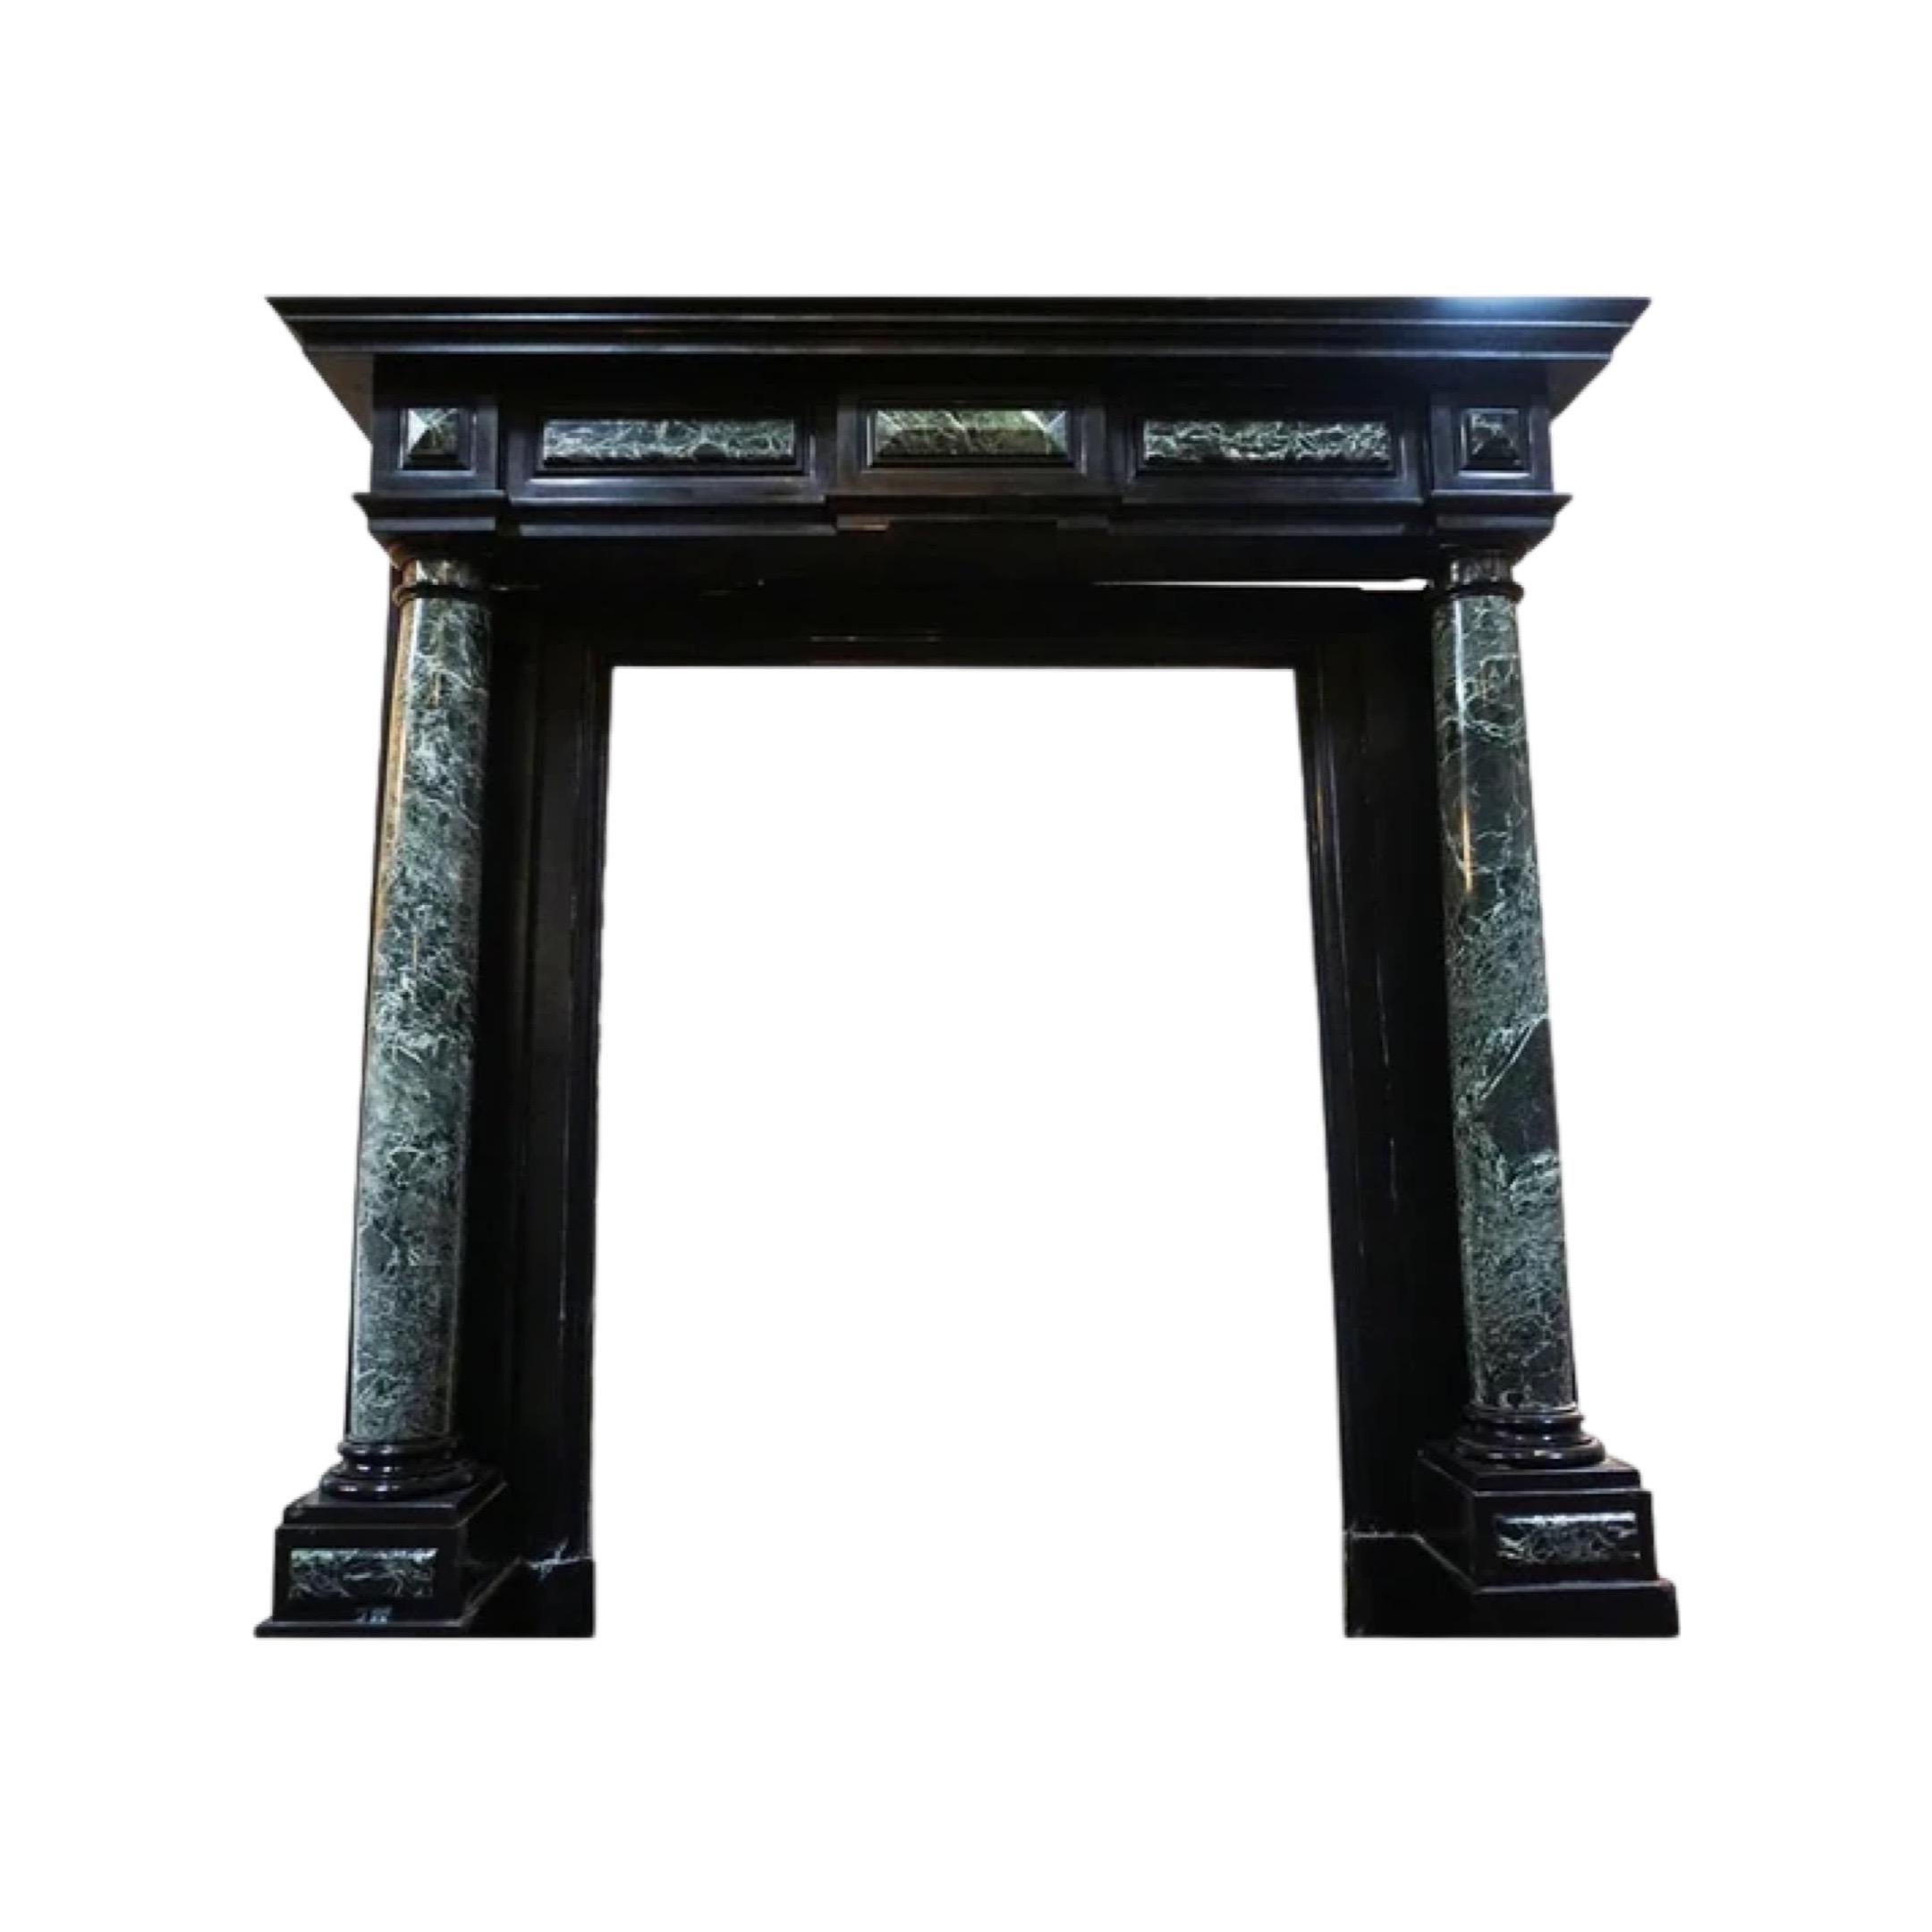 This Napoleon III style fireplace was made in Belgium in the 19th century. Its straight lines are highlighted by panels and columns made out of Sea Green marble. The columns, sculpted in the round, are placed in front of the jambs and are slightly